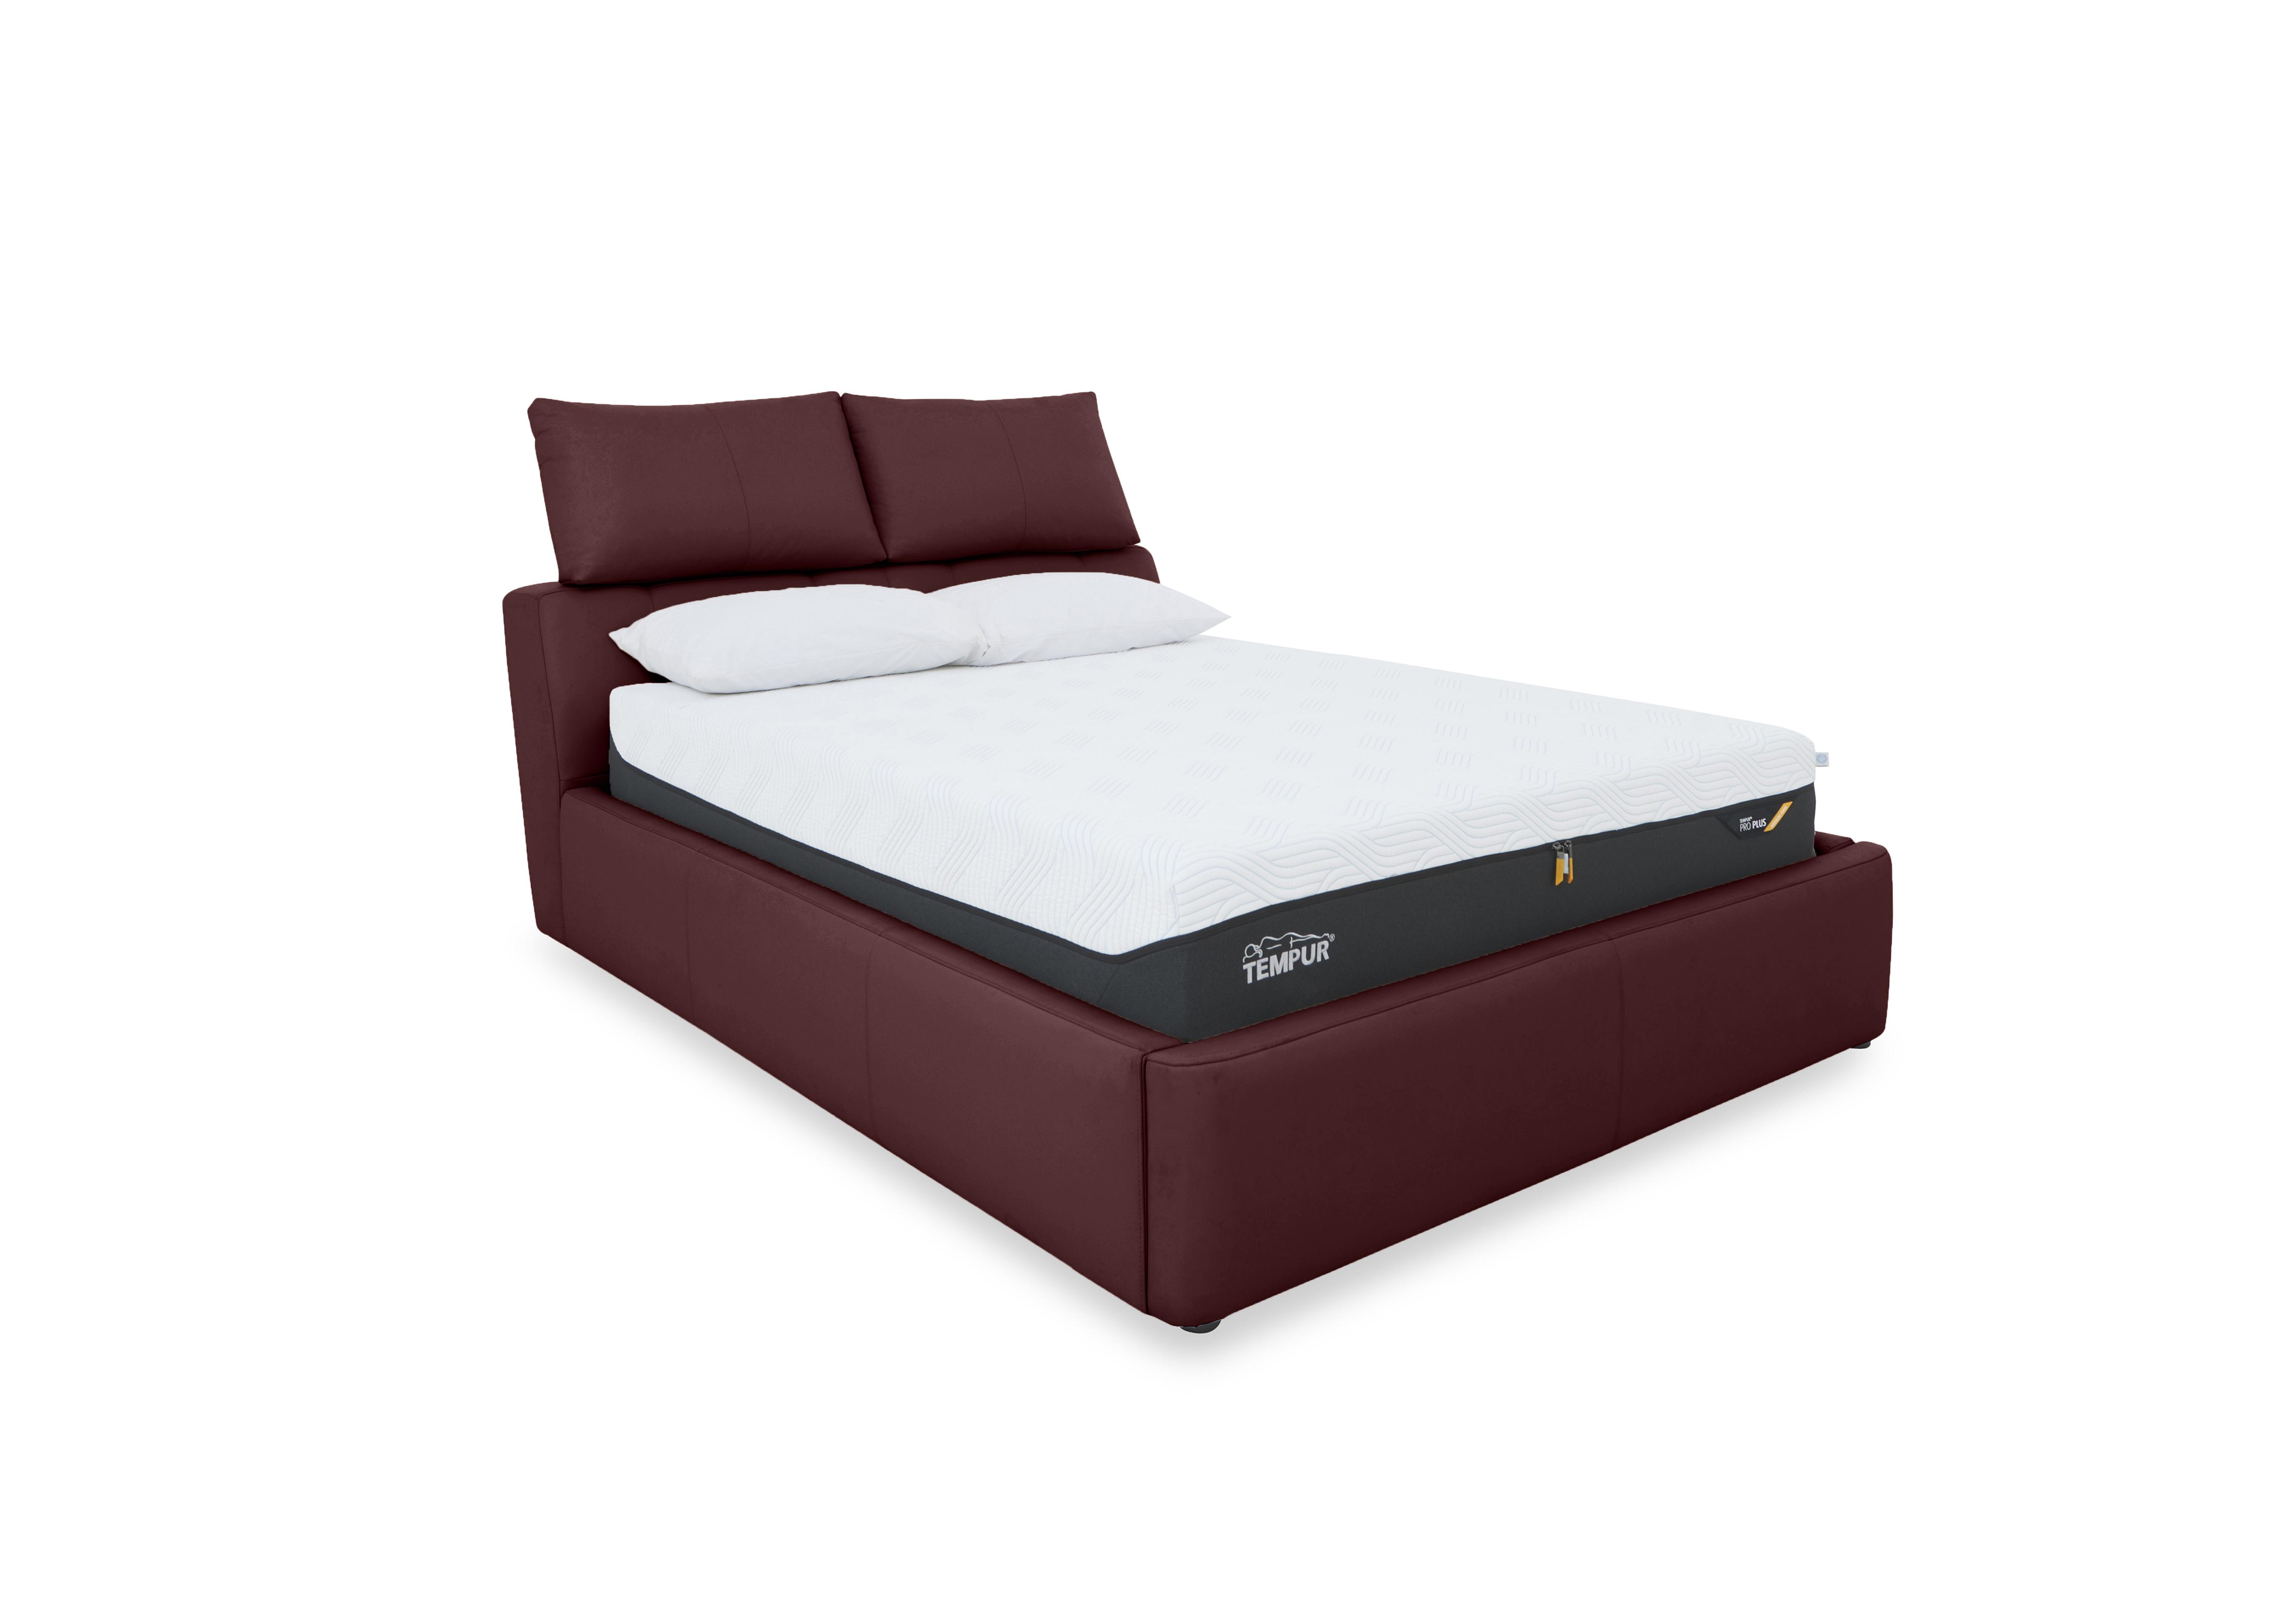 Tyrell Leather Manual Ottoman Bed Frame in Bv-035c Deep Red on Furniture Village